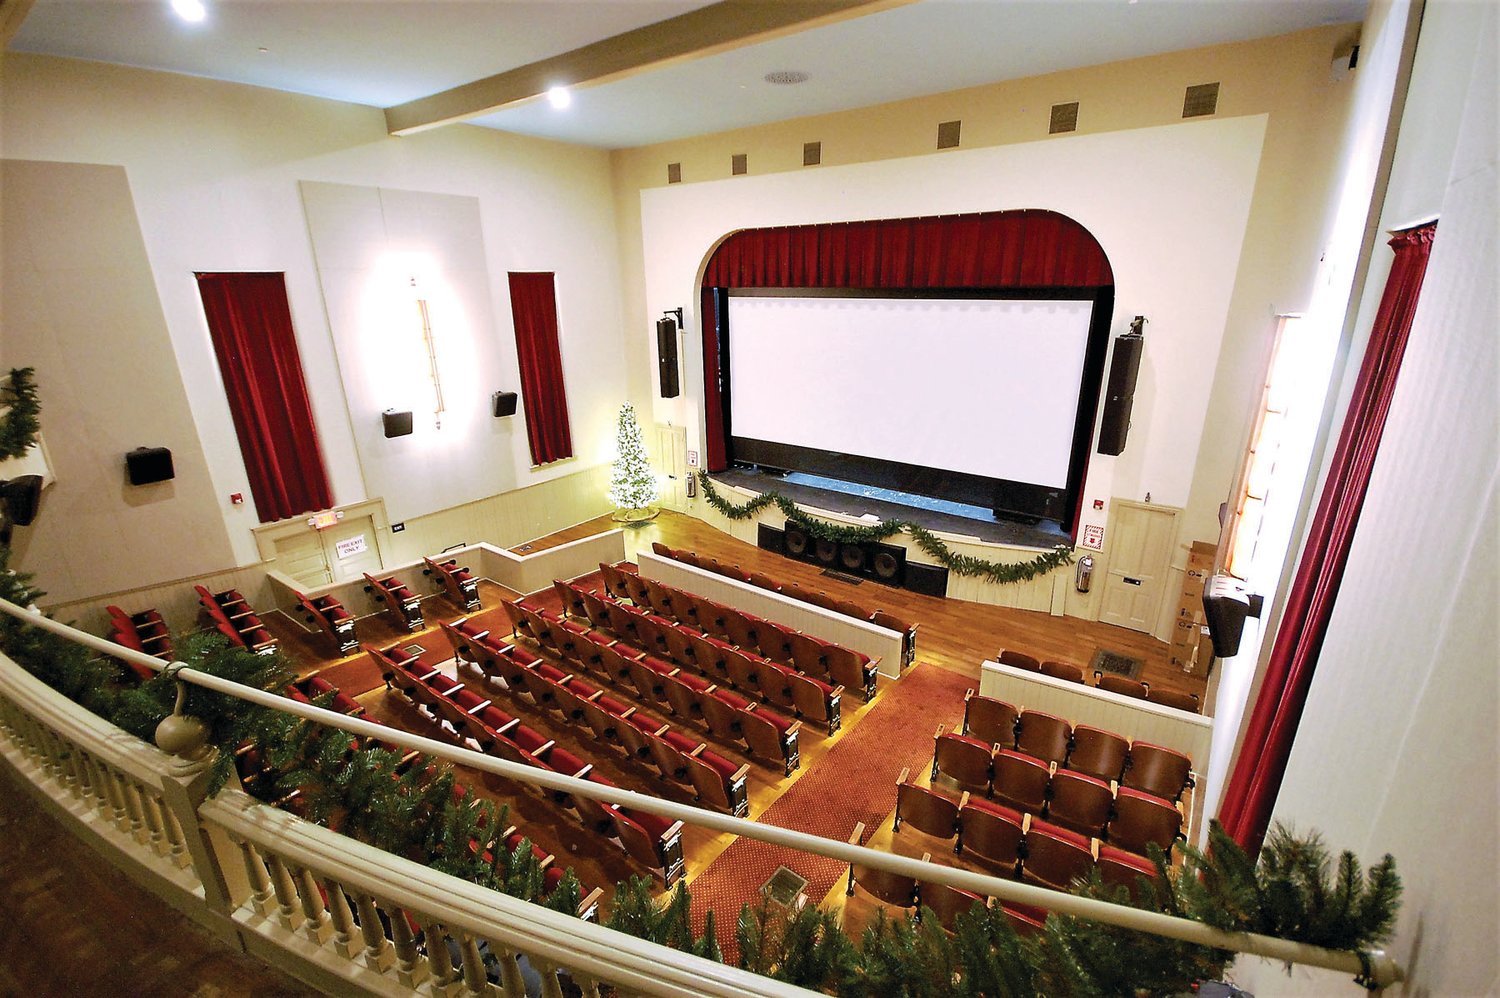 As seen from the theater’s balcony, the renovation included new vintage-style seats on the first floor.